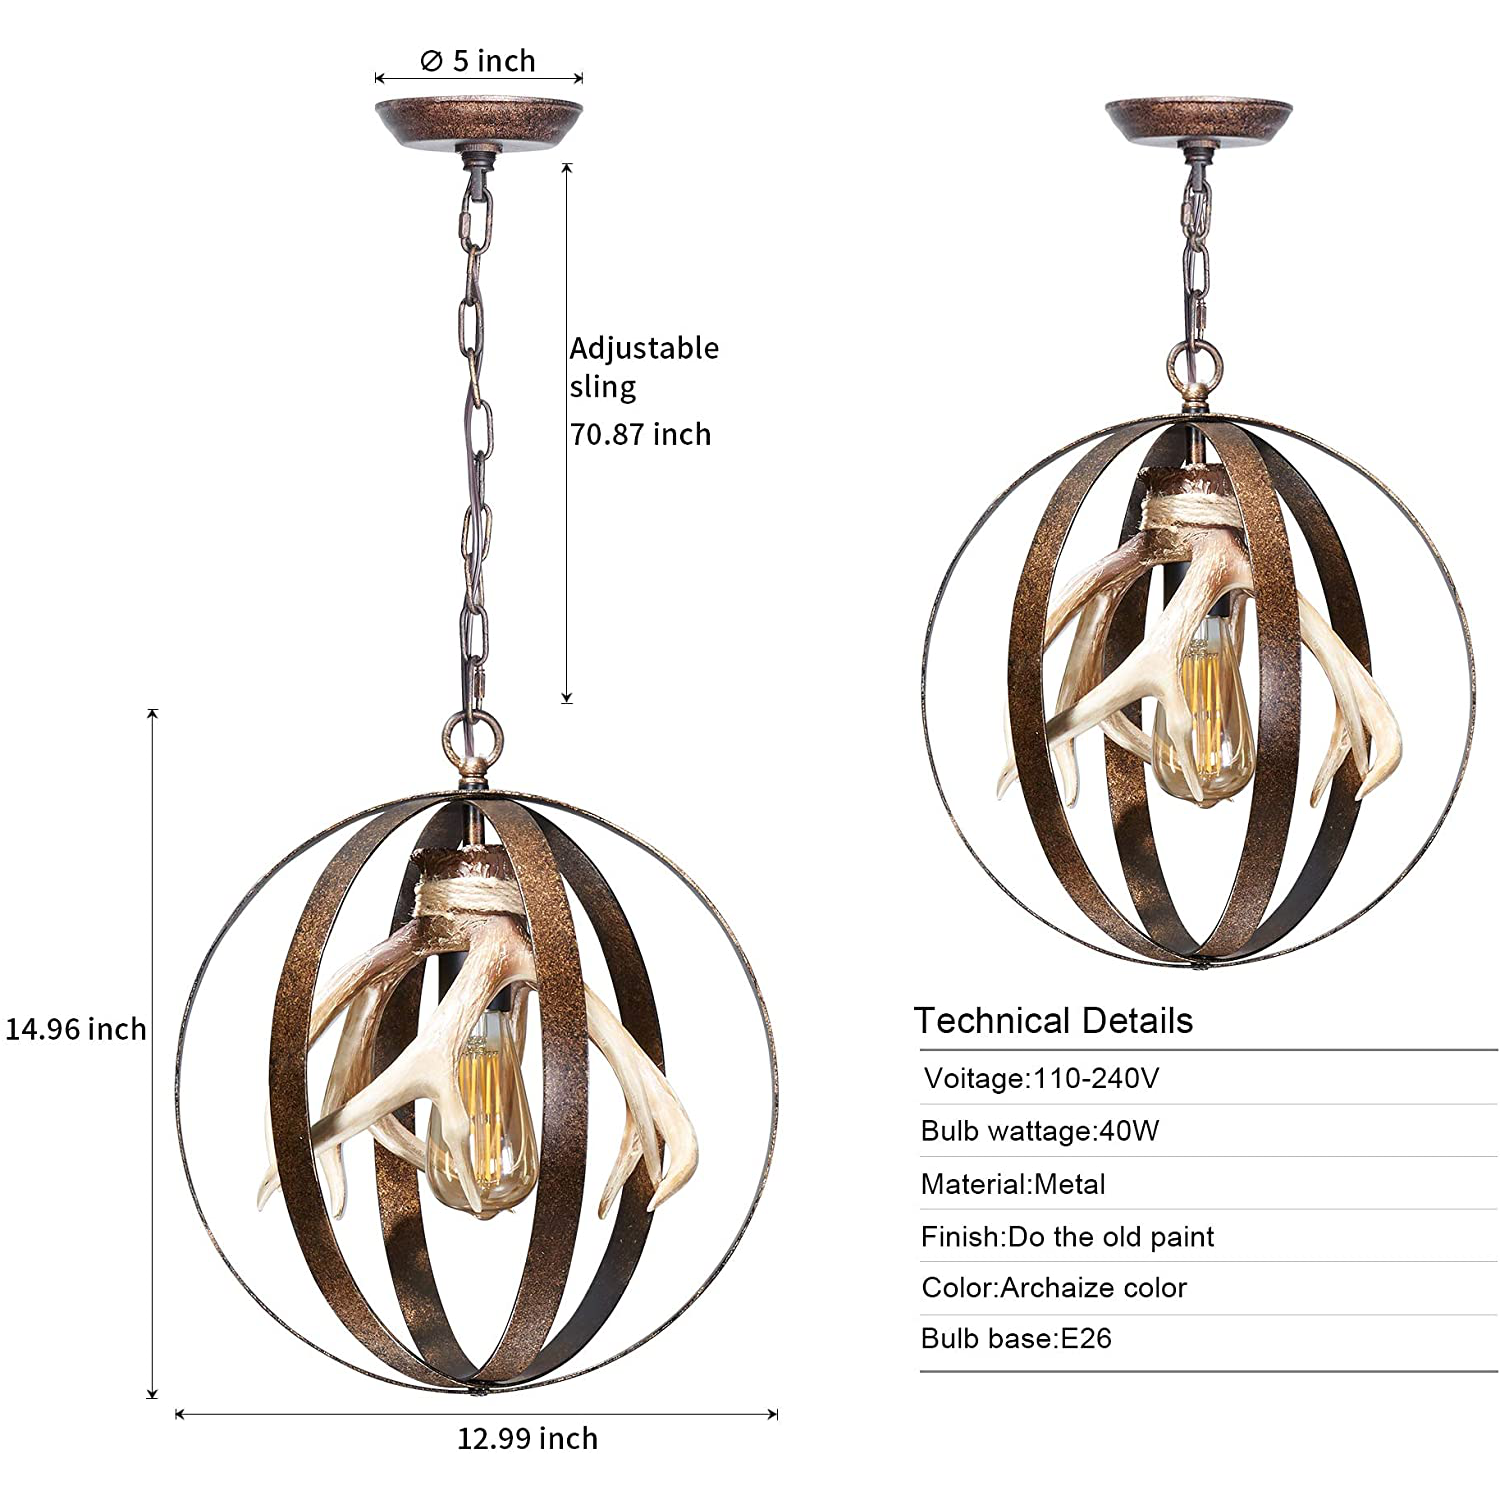 Rustic Farmhouse Chandelier Vintage Globe Pendant Hanging Light Small Antler Ceiling Light Fixture for Kitchen Island Dining Room Foyer Entryway Cabin Decor Light